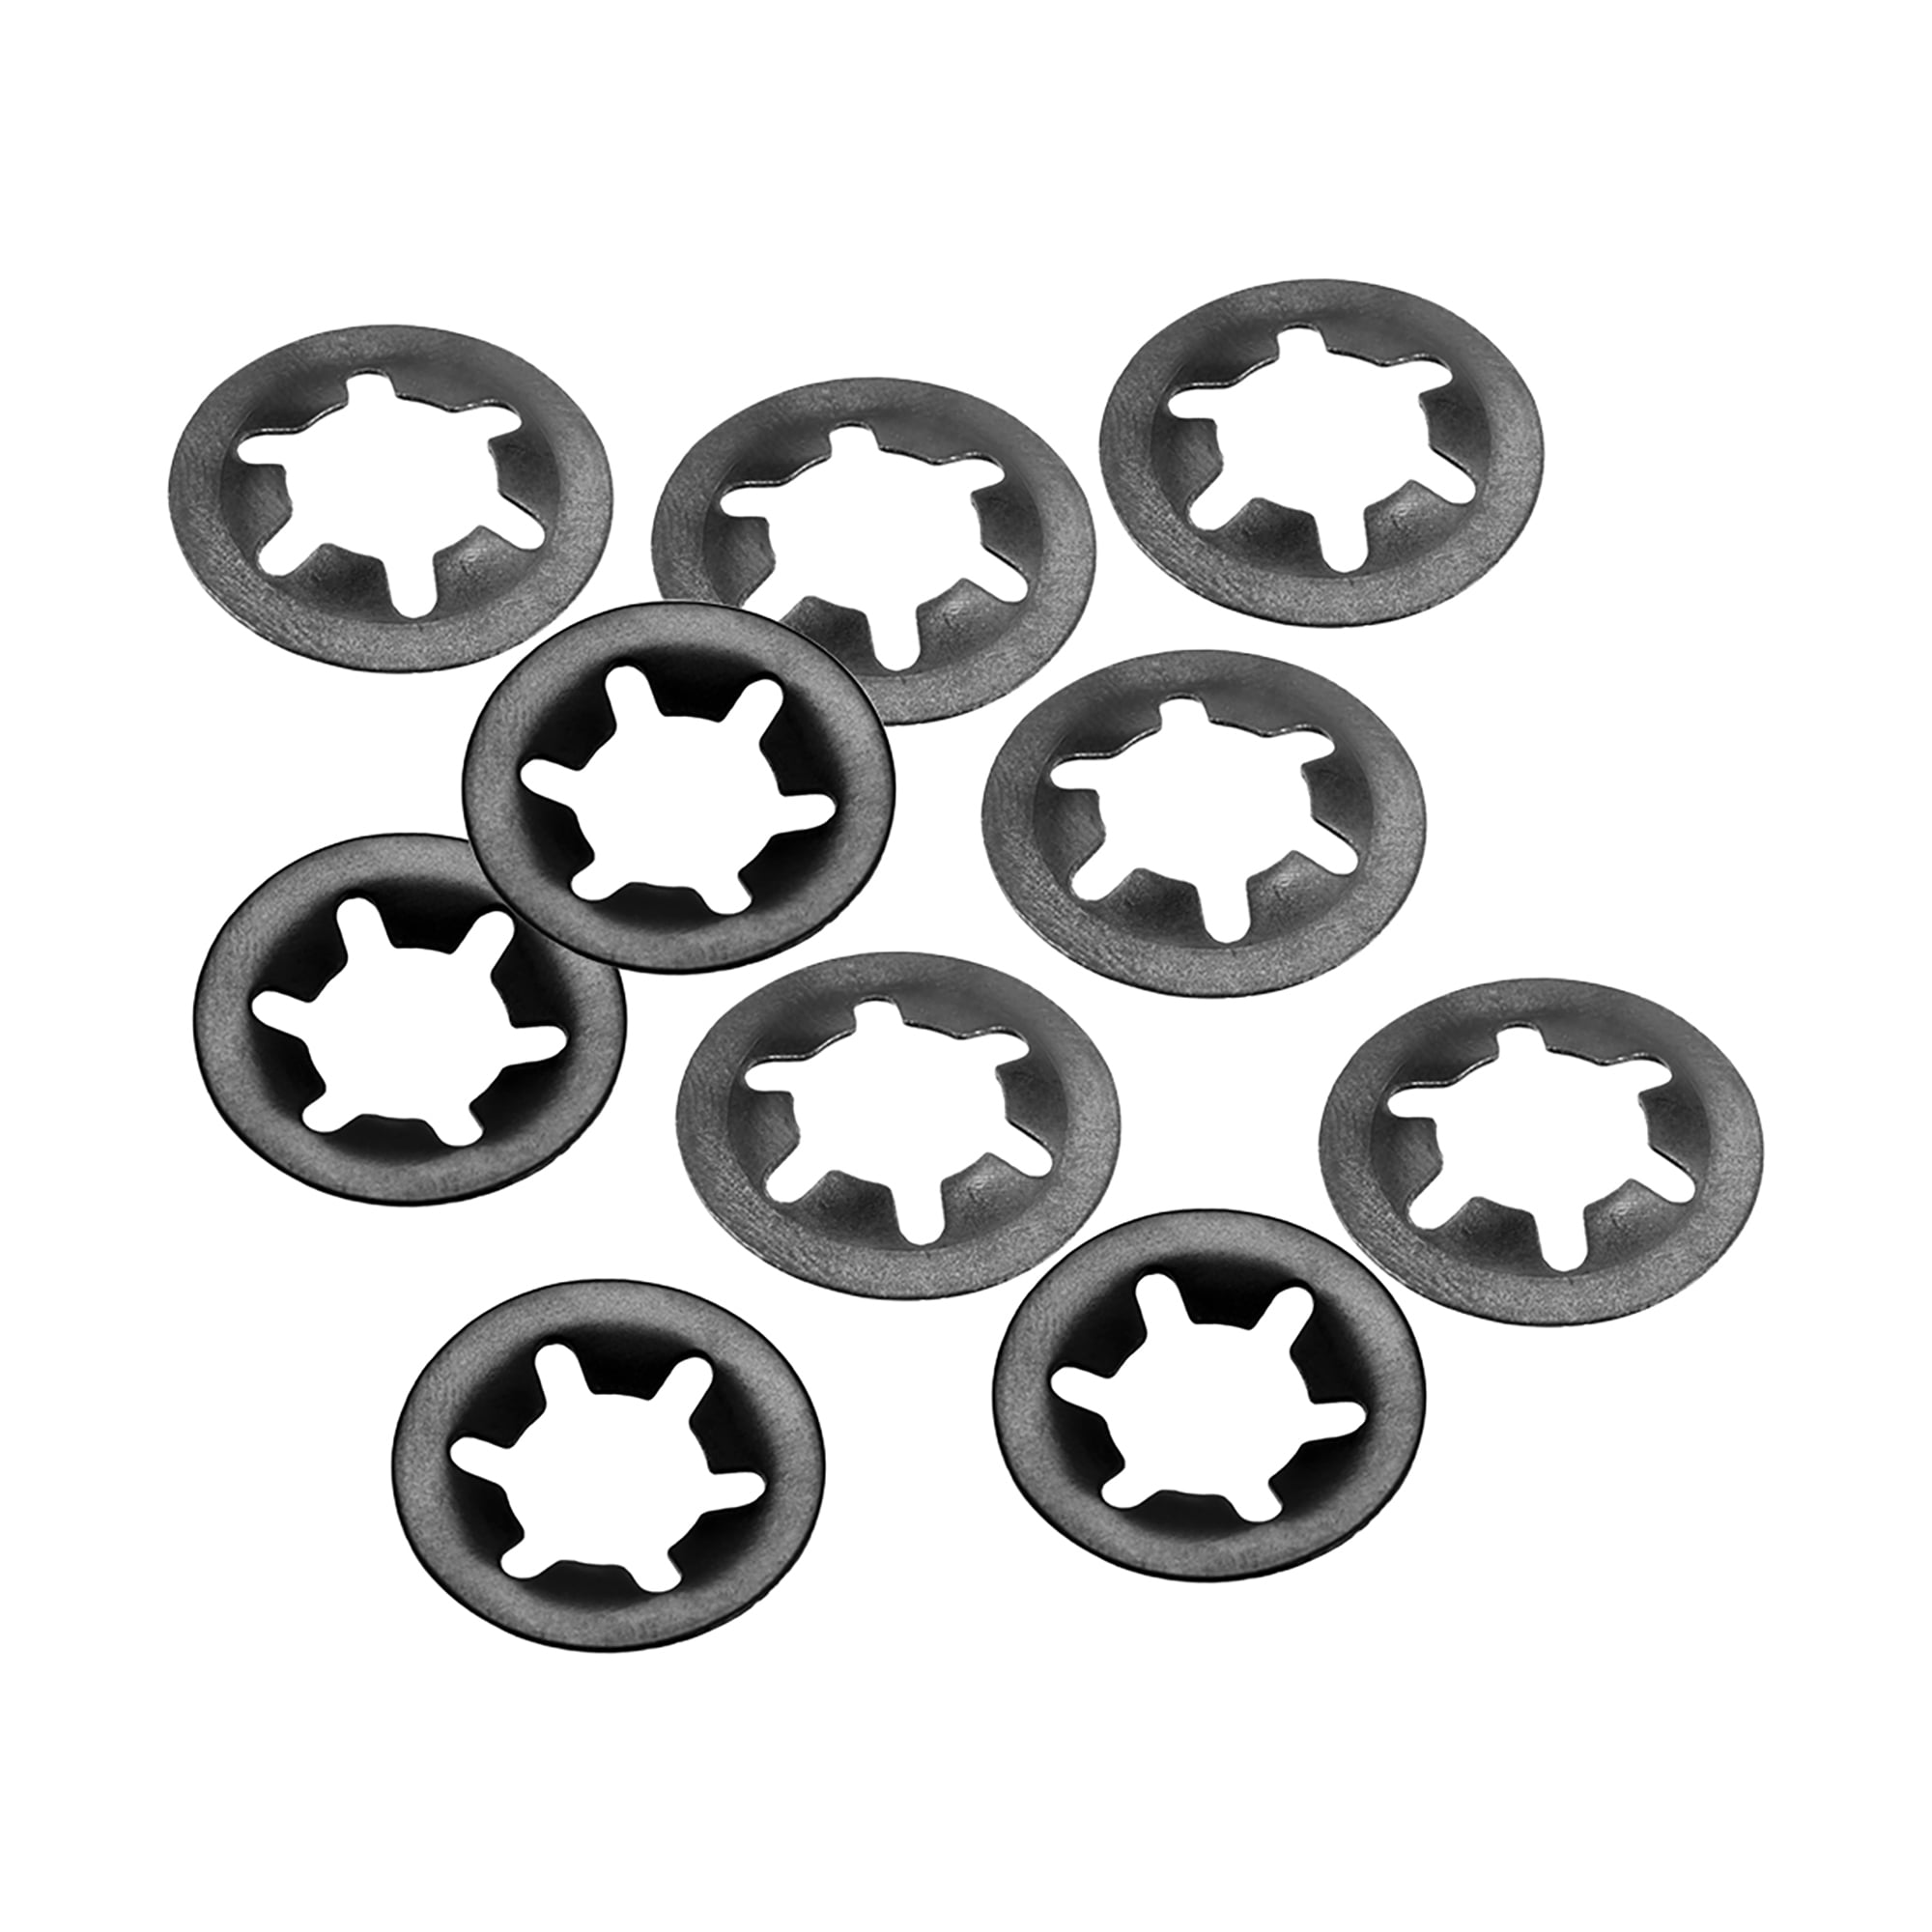 Pack of 10 Starlock Washers M10x20  Internal Tooth Clips Fasteners Kit 